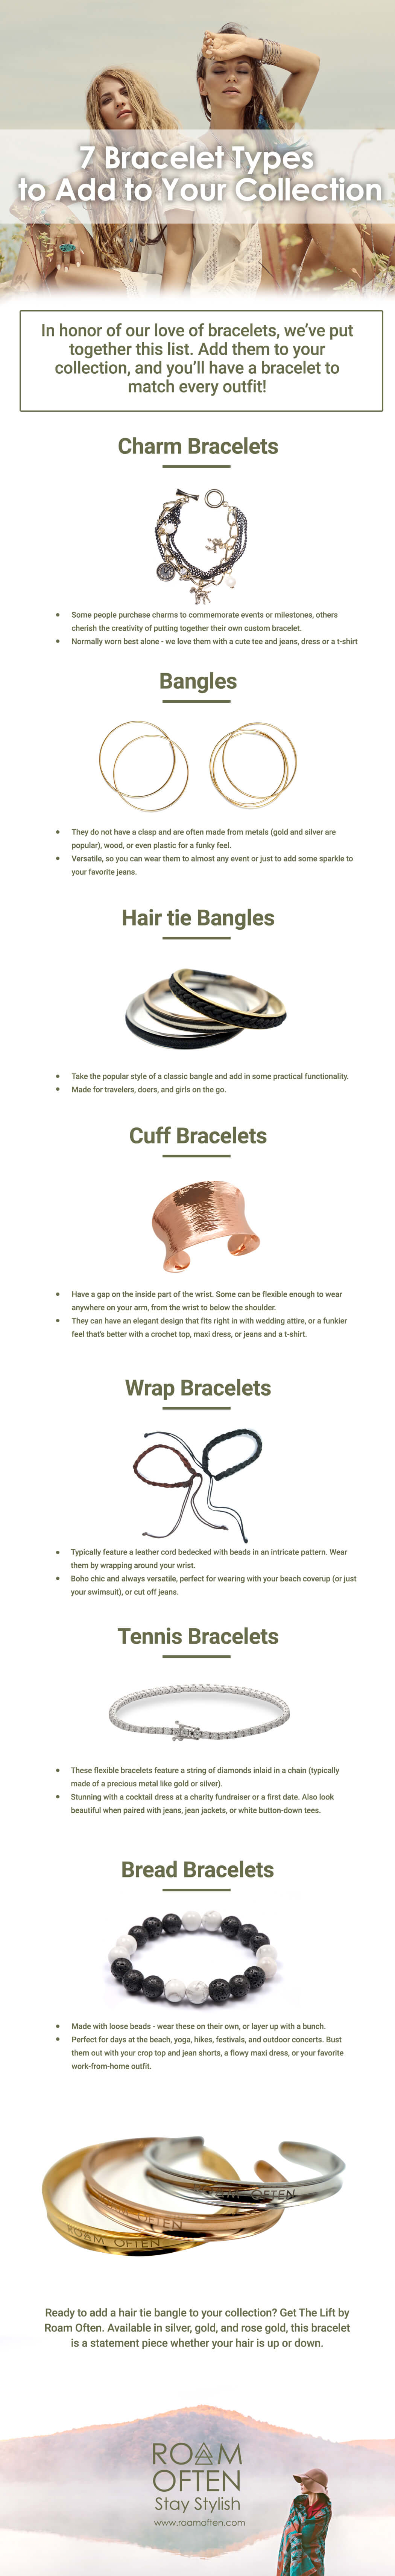 7-bracelet-types-to-add-to-your-collection-infographic-plaza